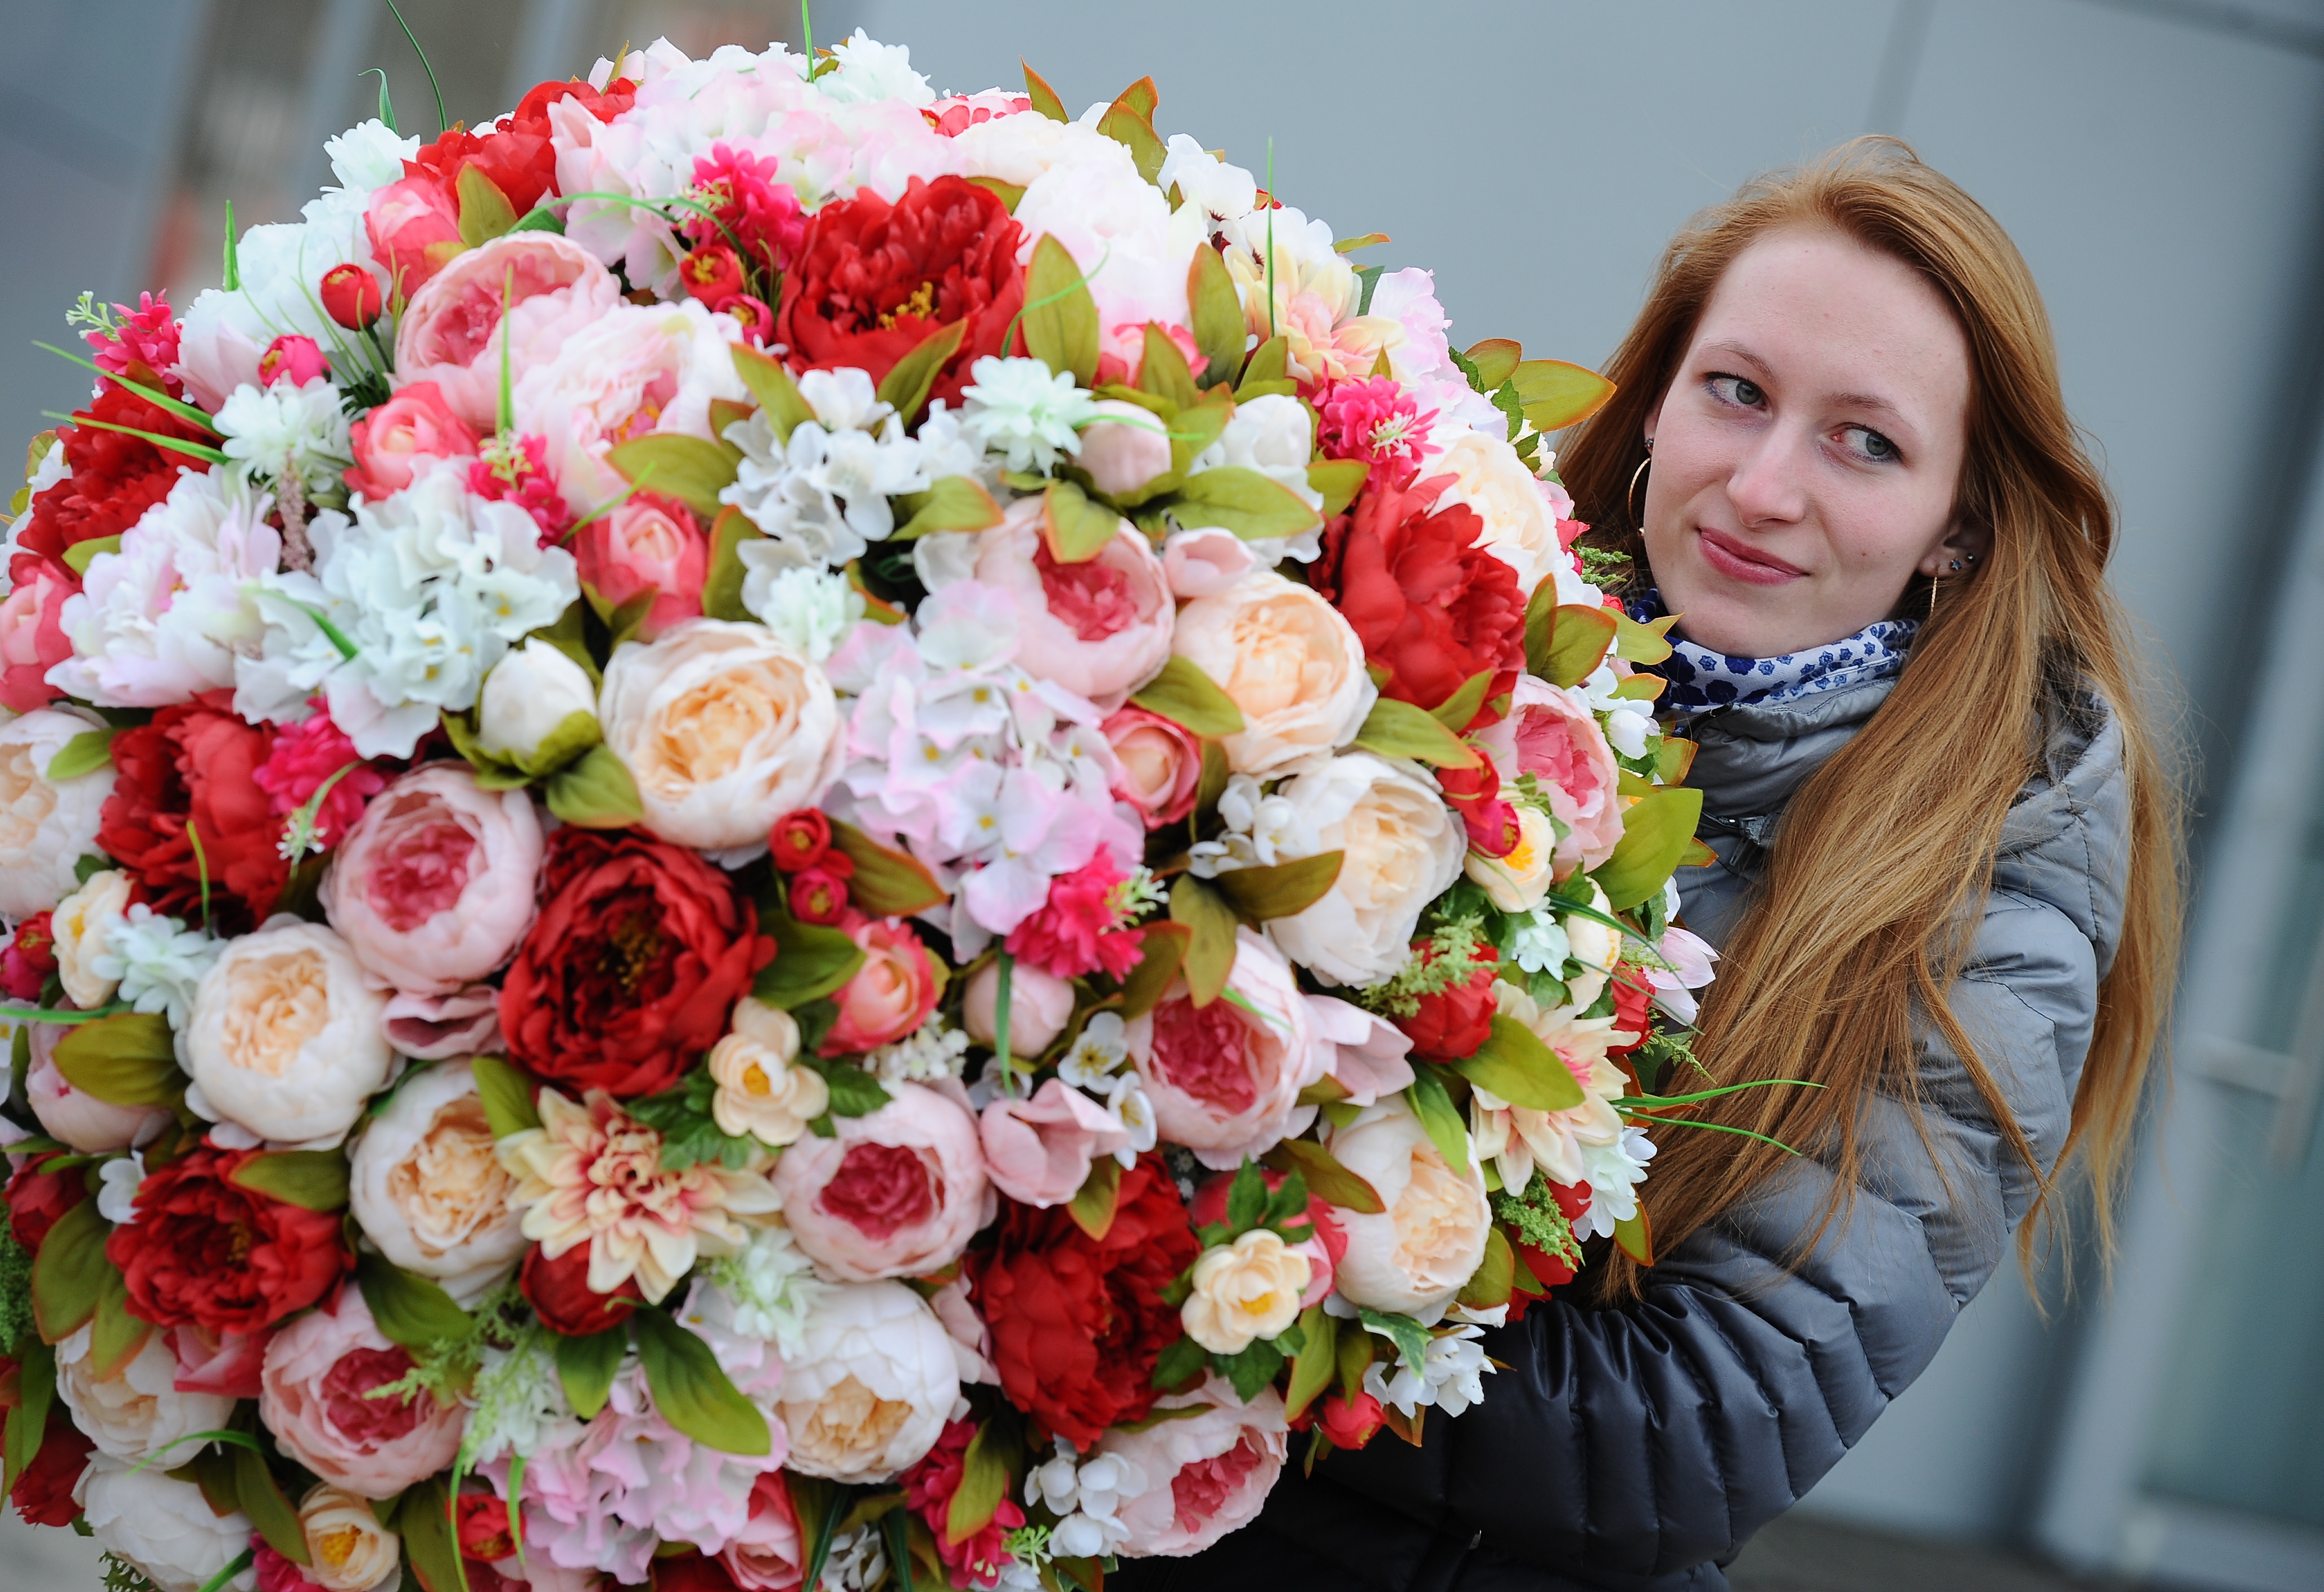 Women’s Day is one of the biggest holidays of the year in Russia. Source: Alexander Ryumin/TASS